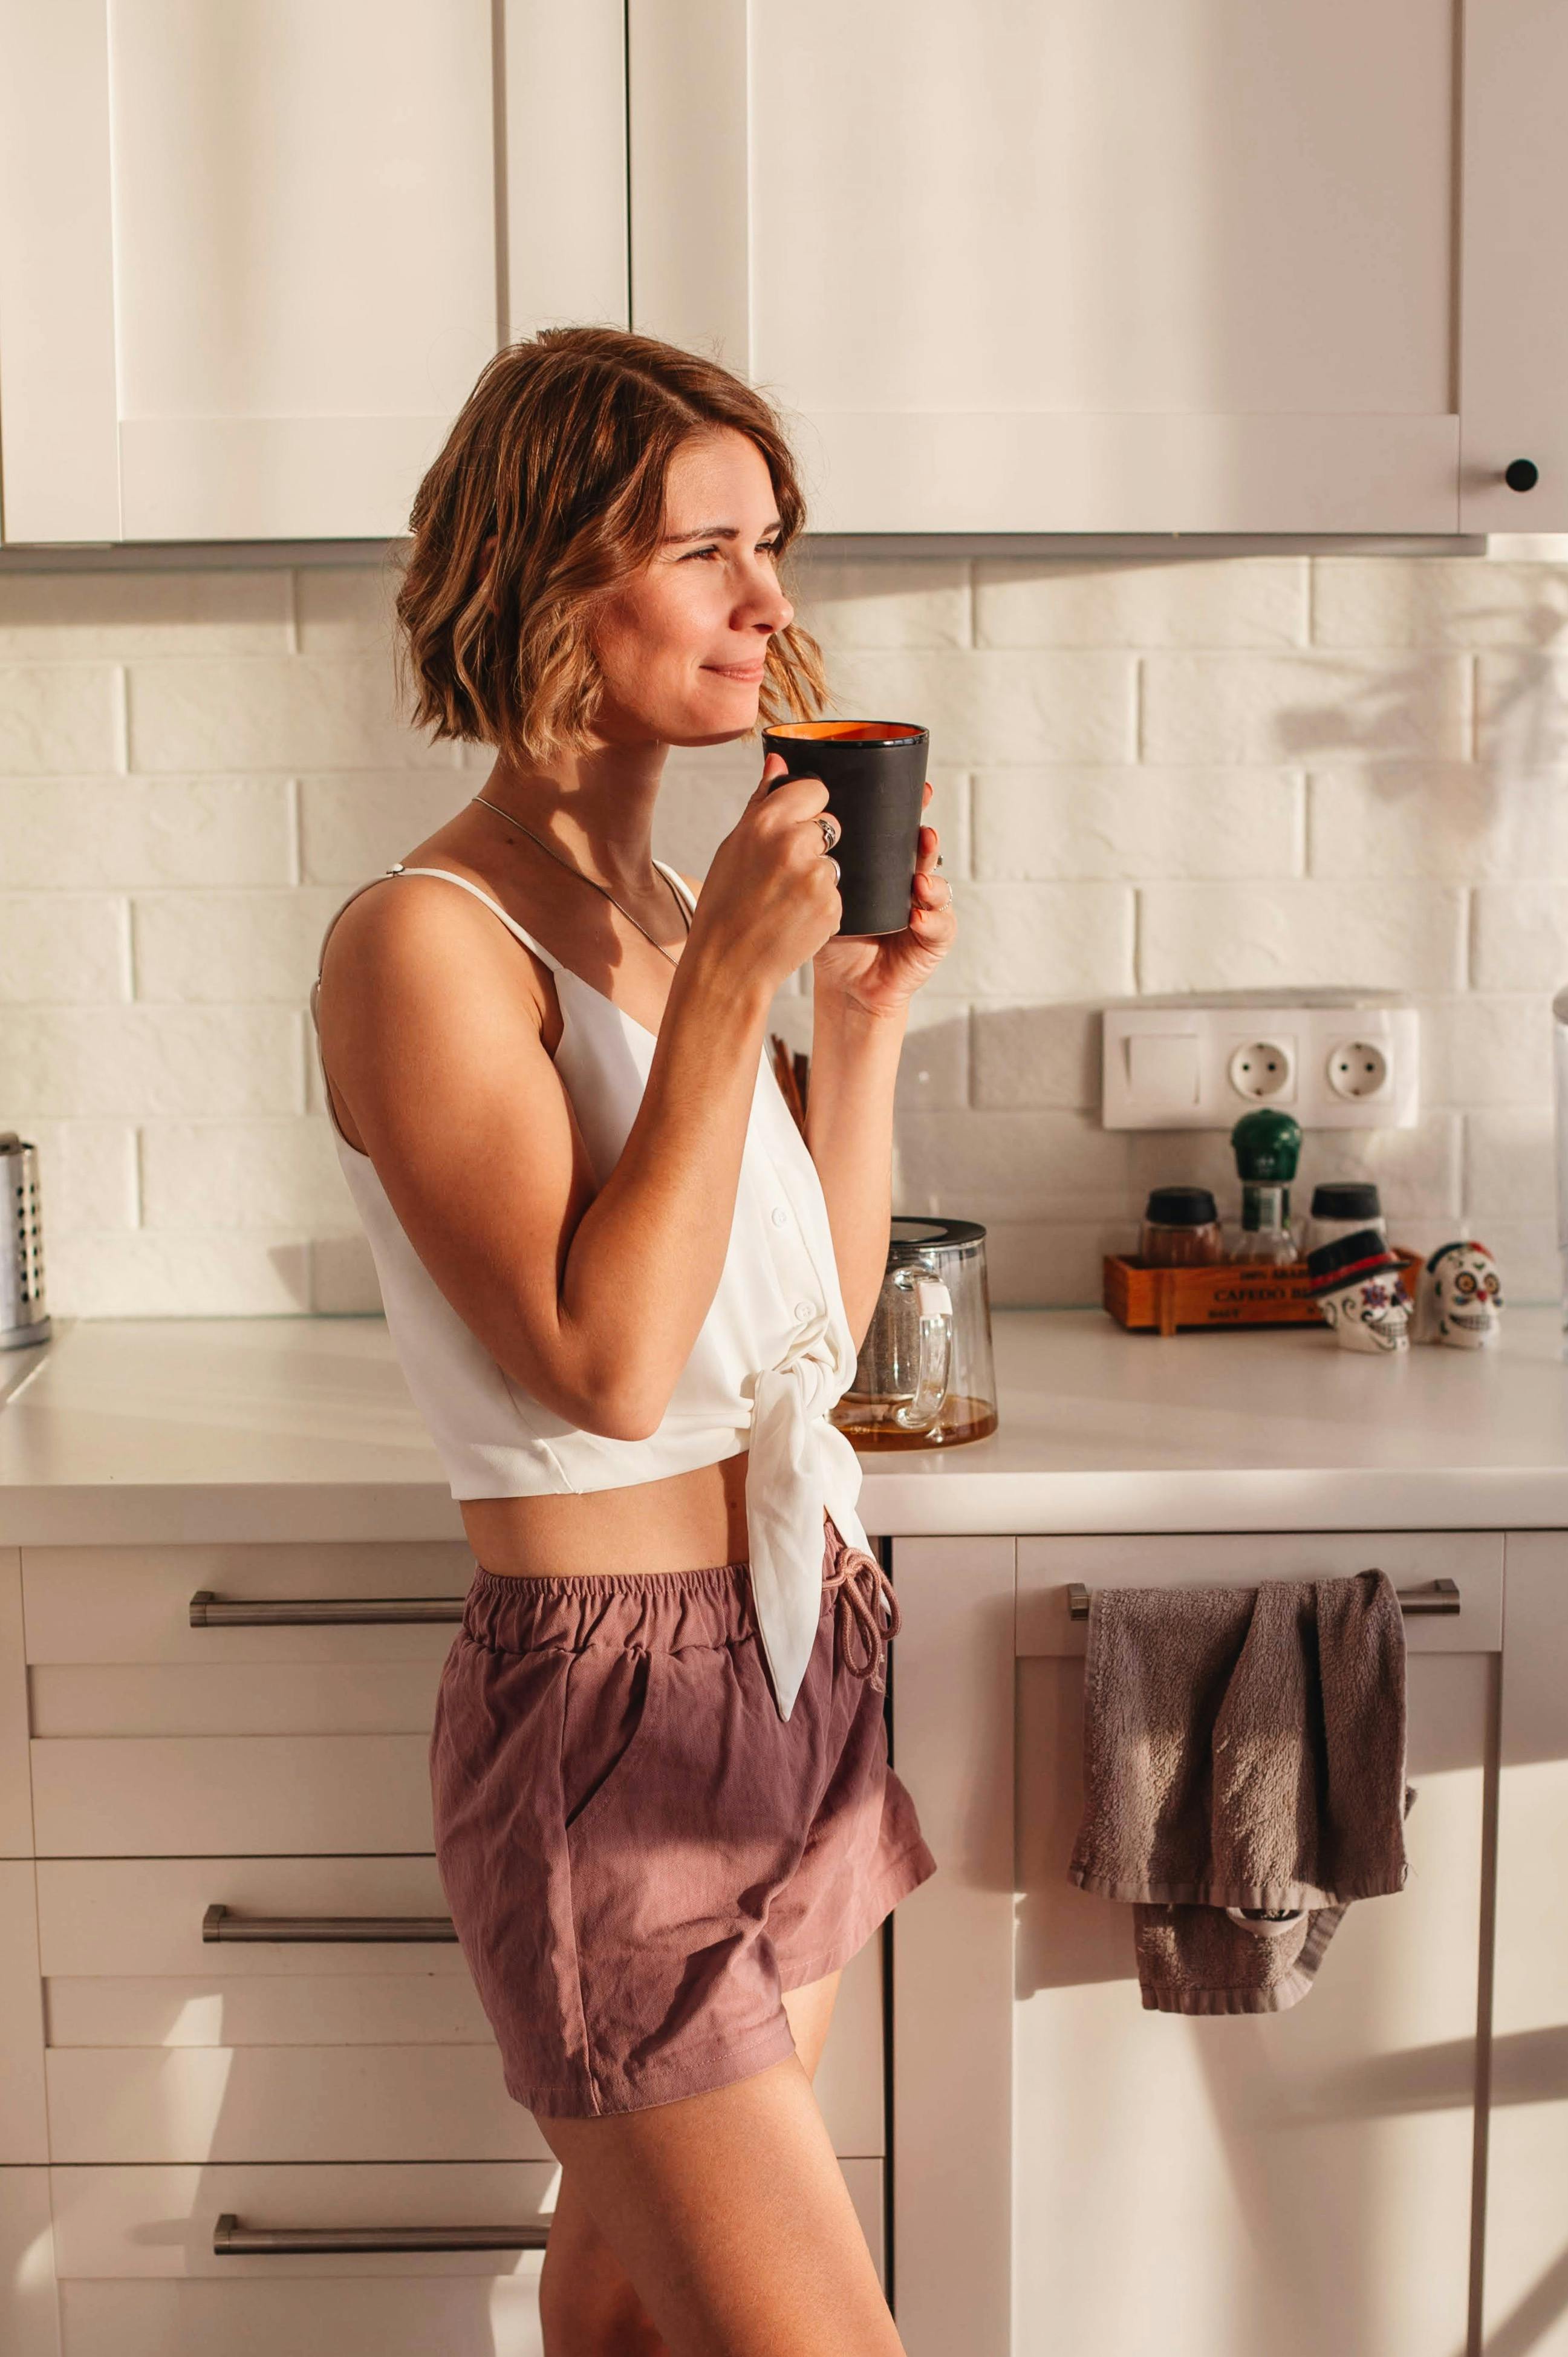 A happy woman contemplating something while having a beverage | Source: Pexels